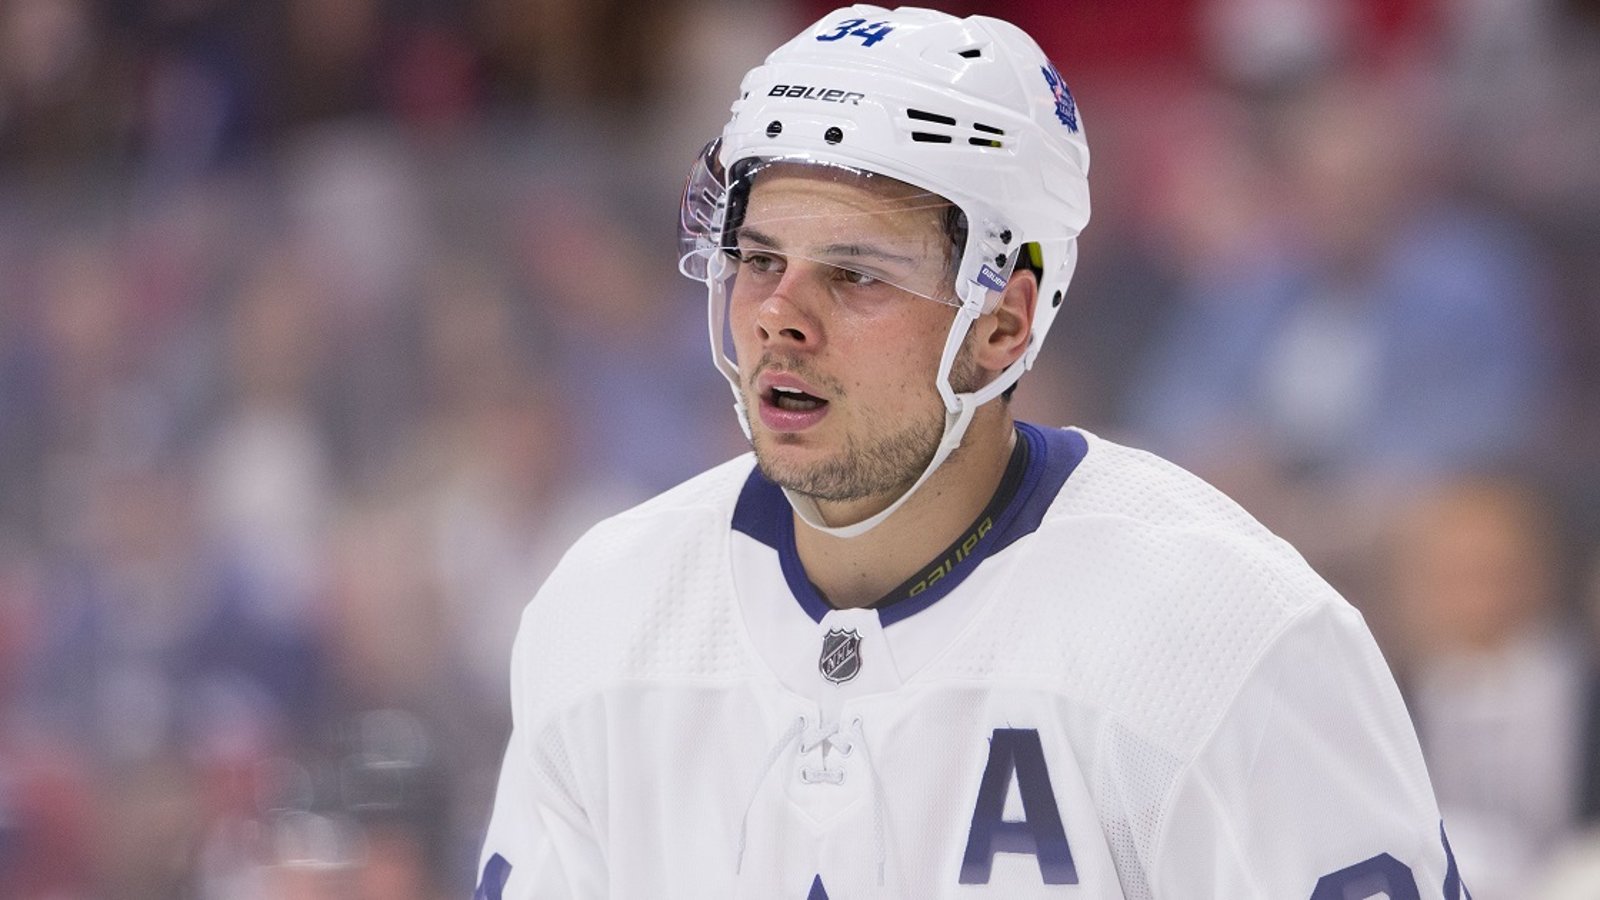 Breaking: Maple Leafs confirm the worst for Auston Matthews.